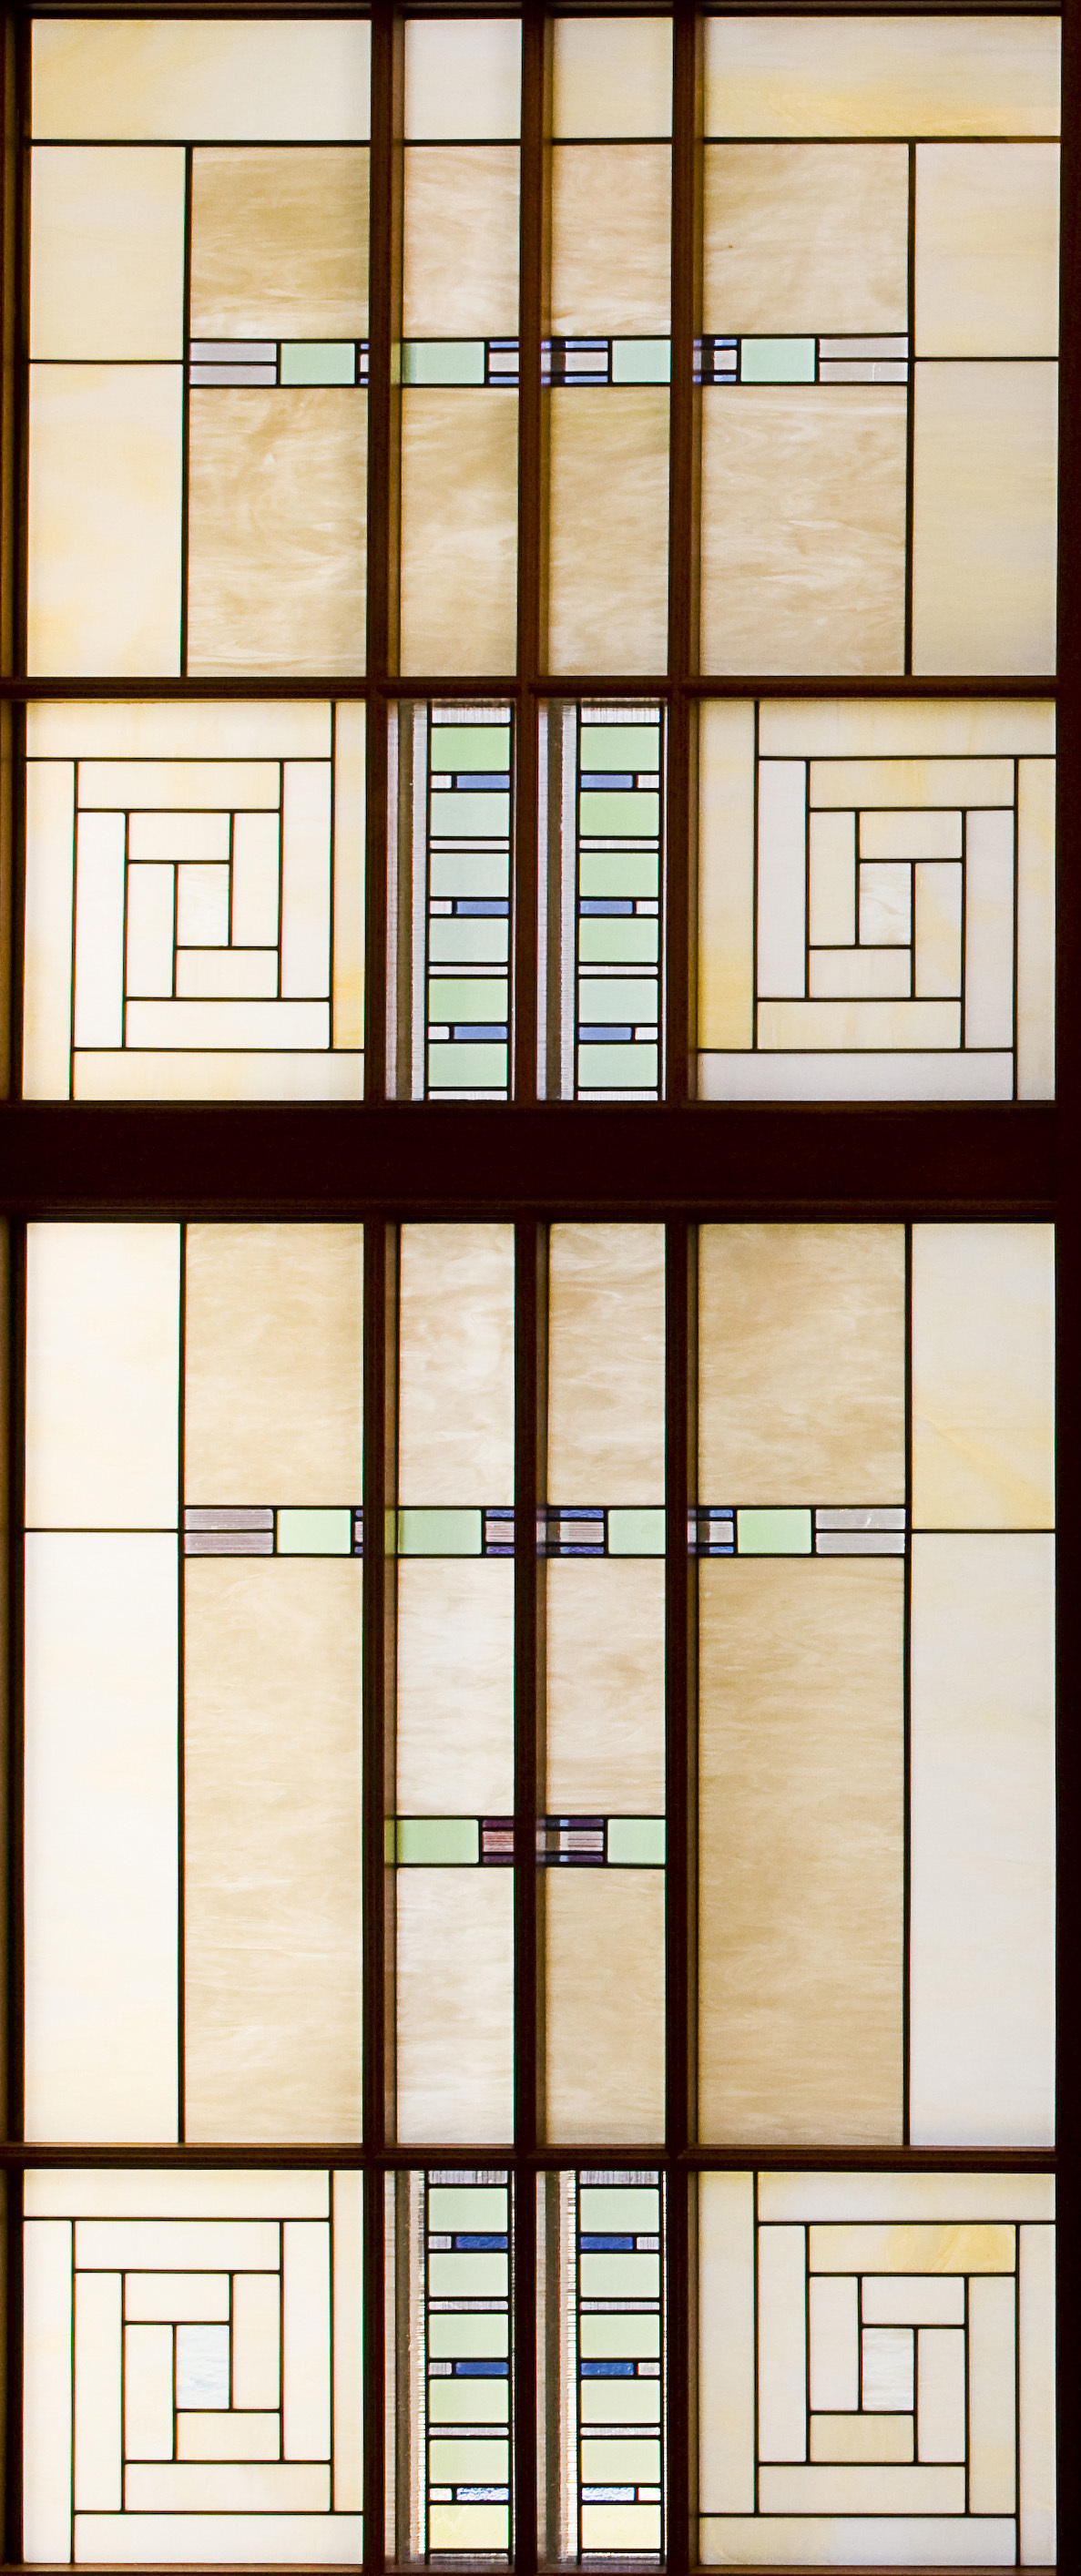 A close-up of an art-glass window with rectangle designs throughout.